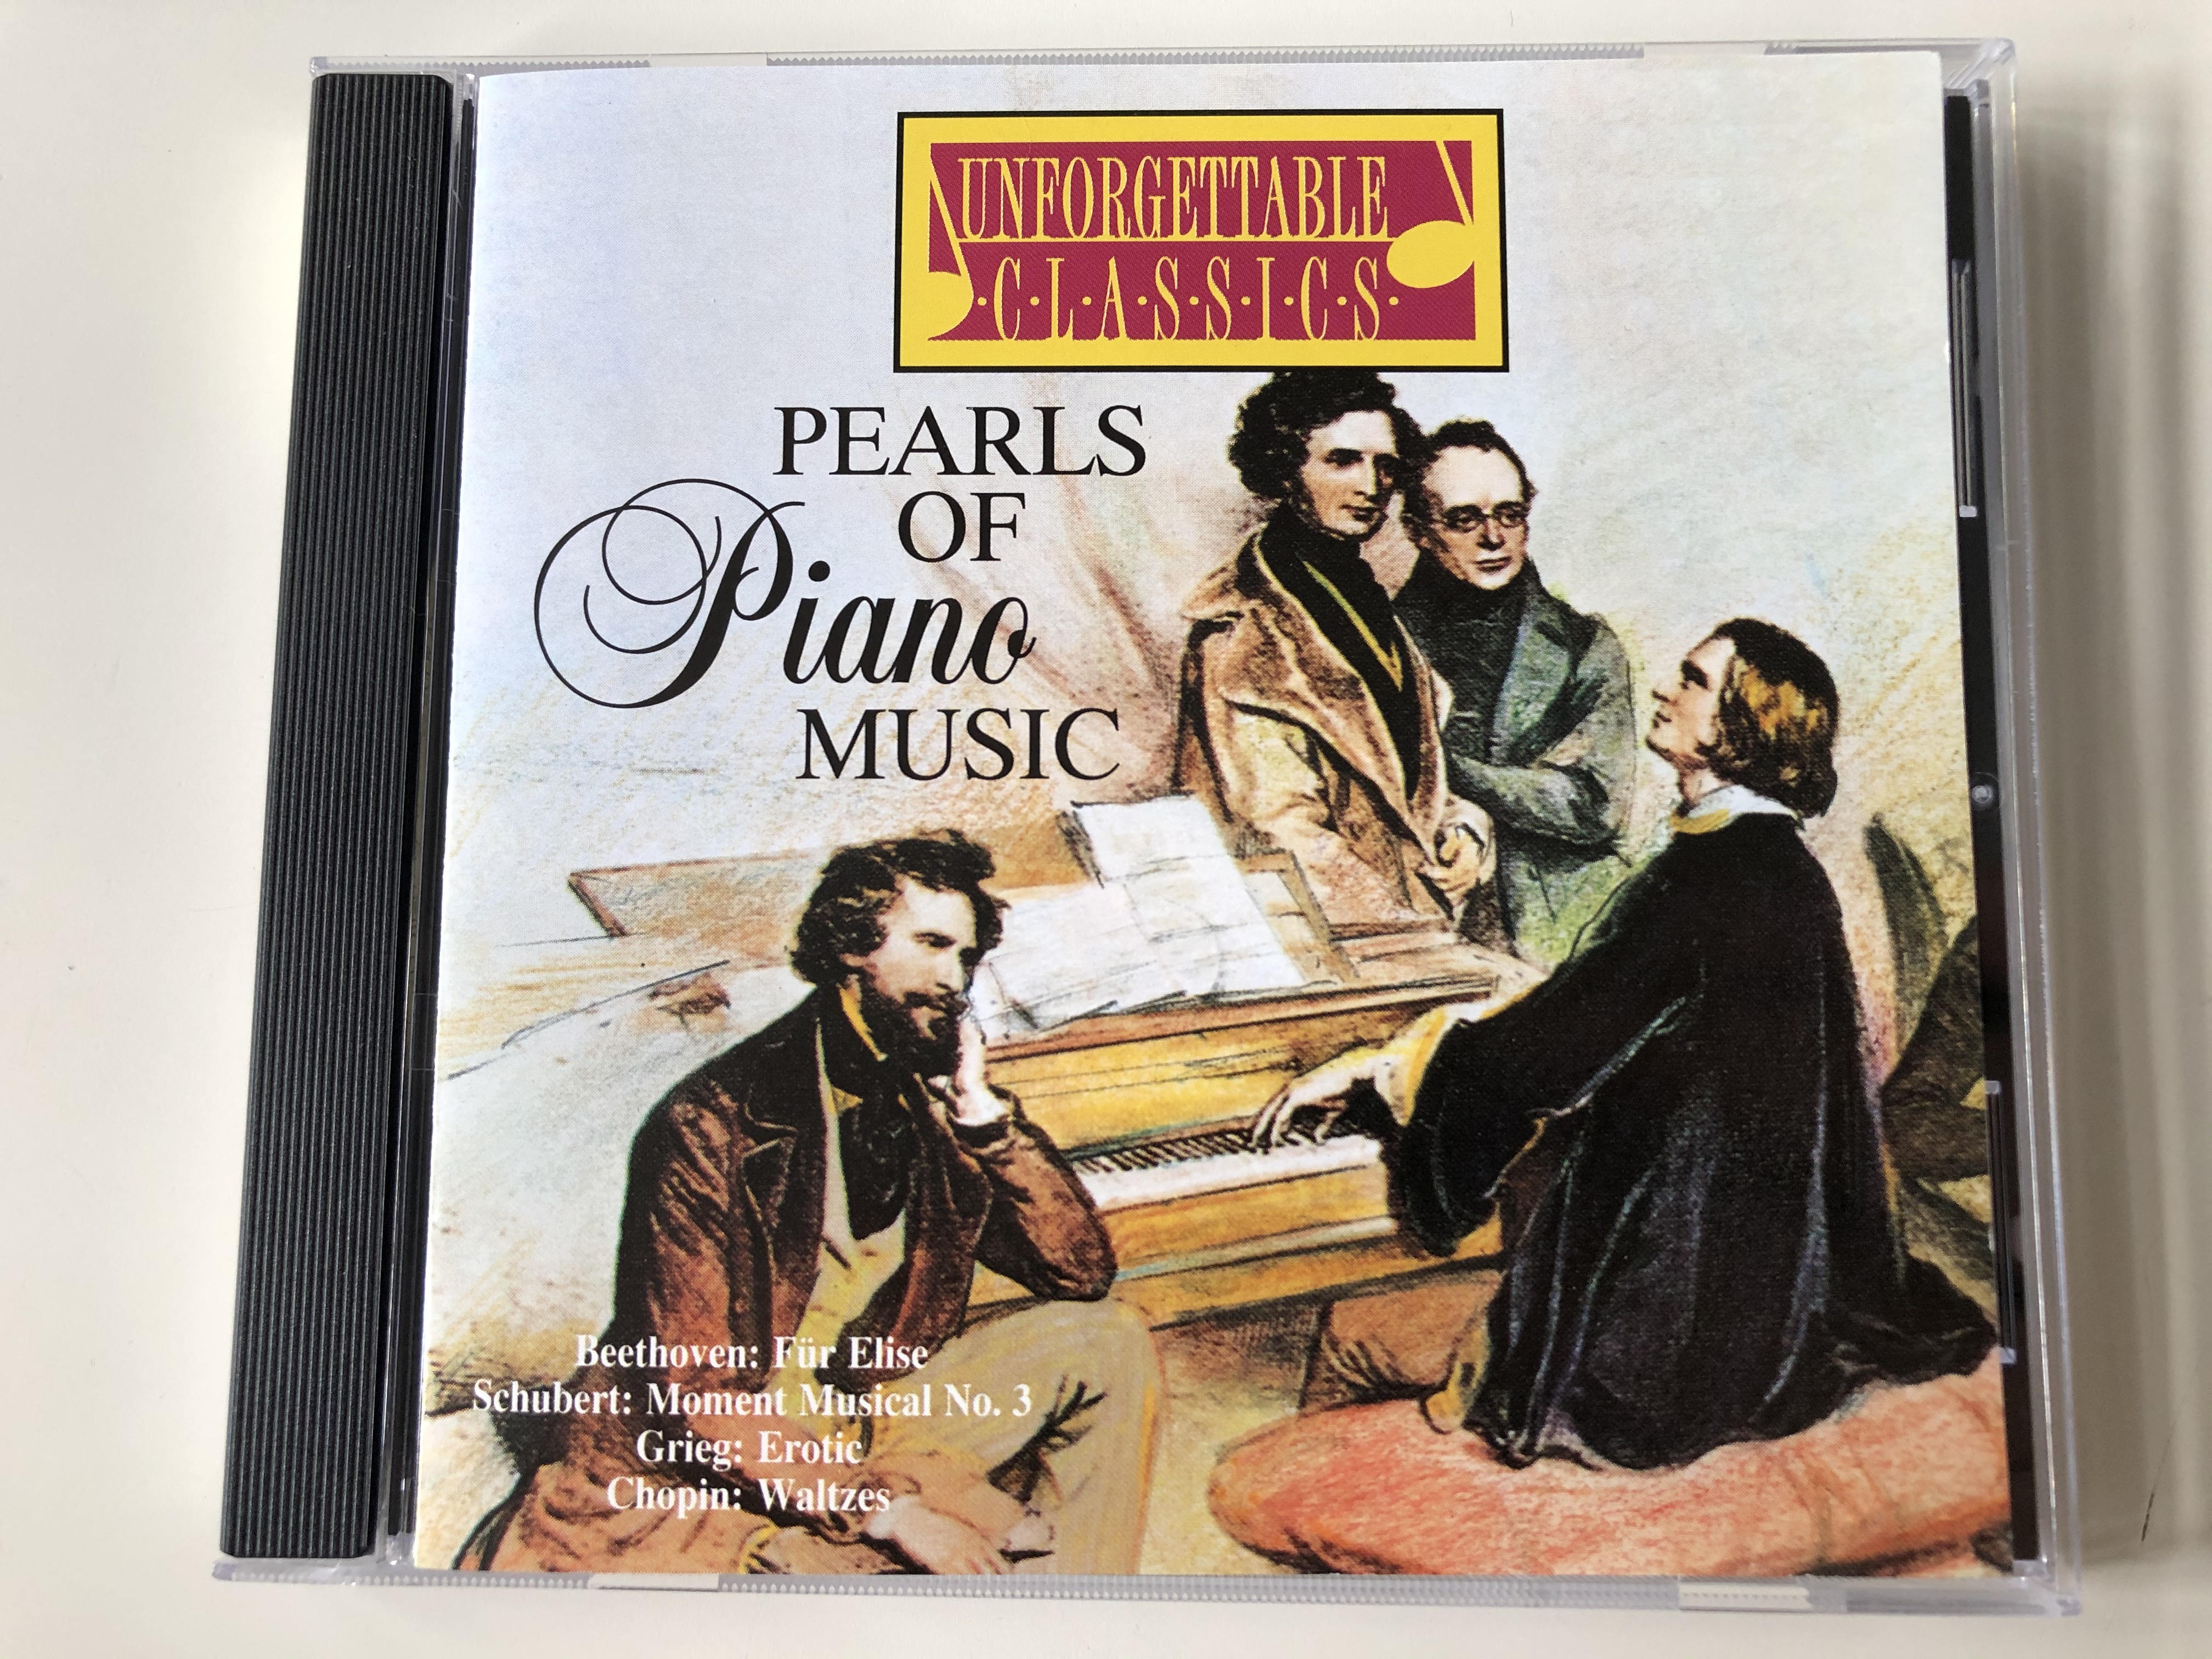 pearls-of-piano-music-beethoven-fur-elise-schubert-moment-musical-no.-3-grieg-erotic-chopin-waltez-unforgettable-classic-audio-cd-1998-uc-1503-1-.jpg